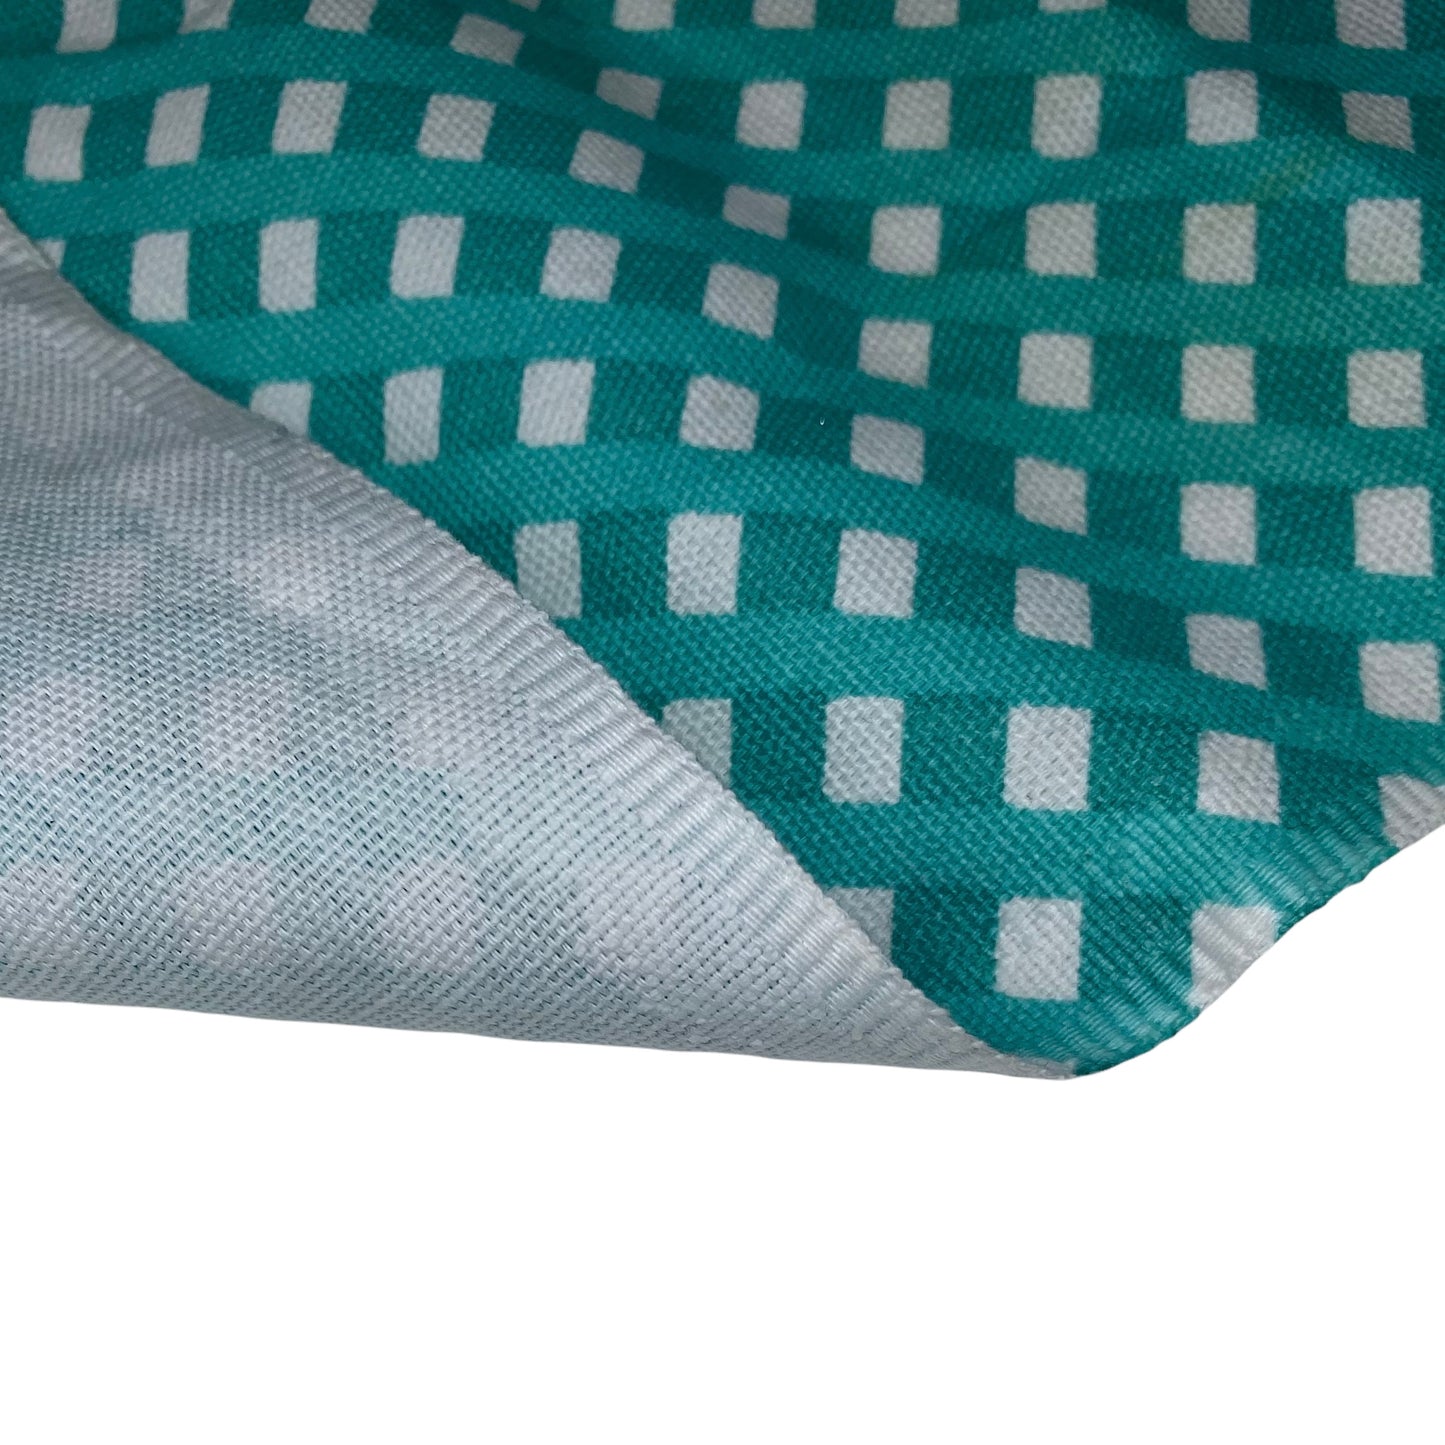 Printed Cotton Canvas - Teal/White